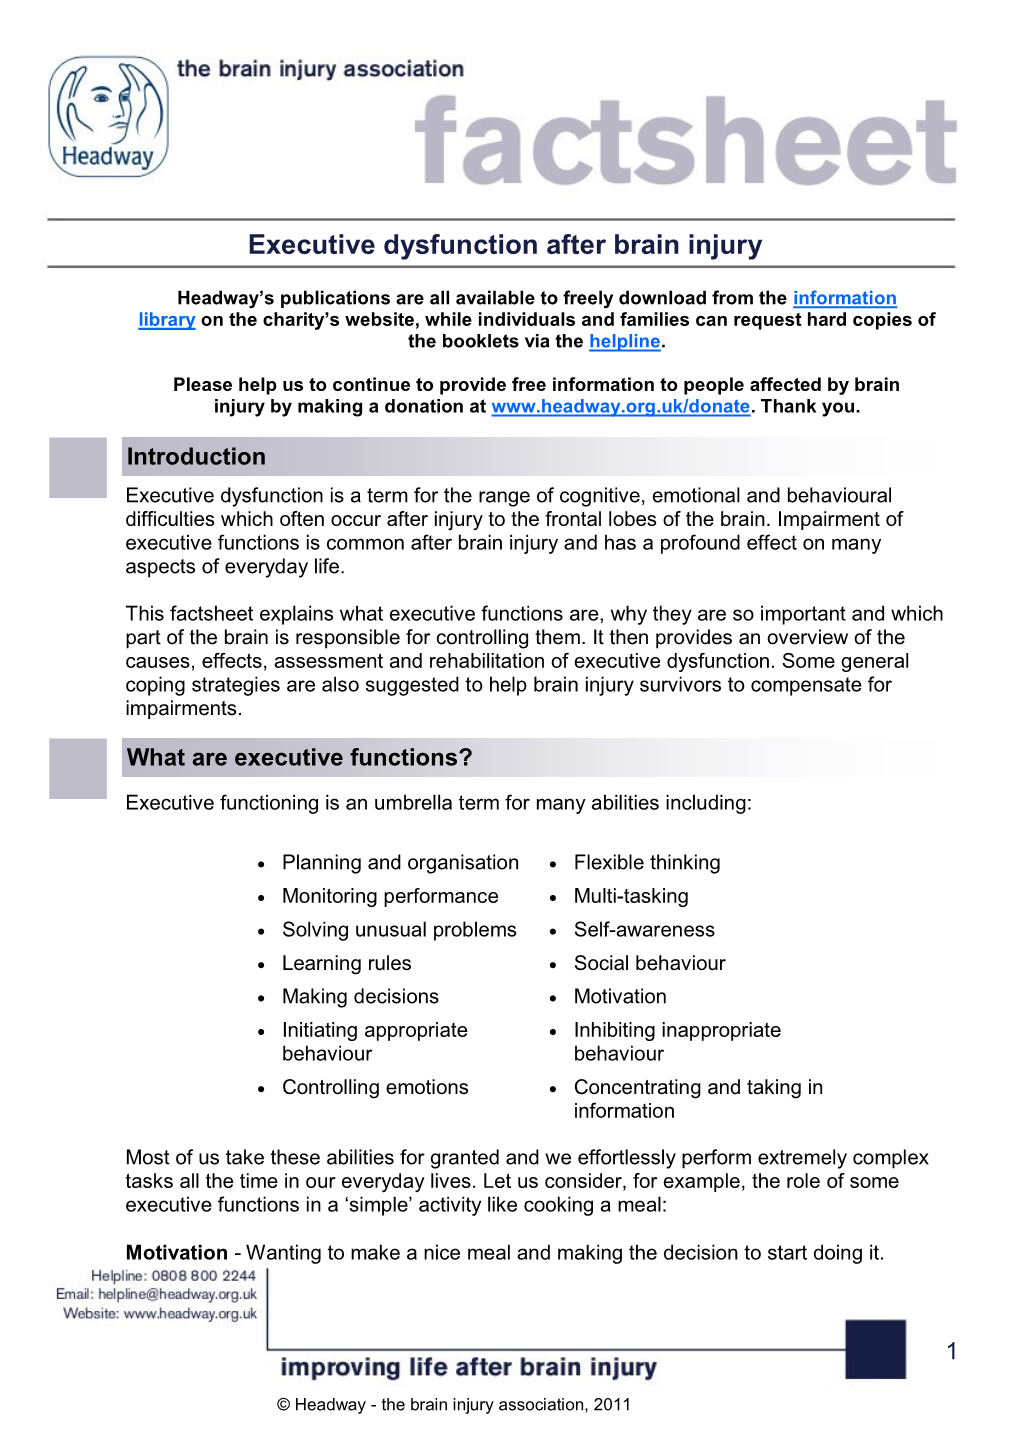 Executive Dysfunction After Brain Injury